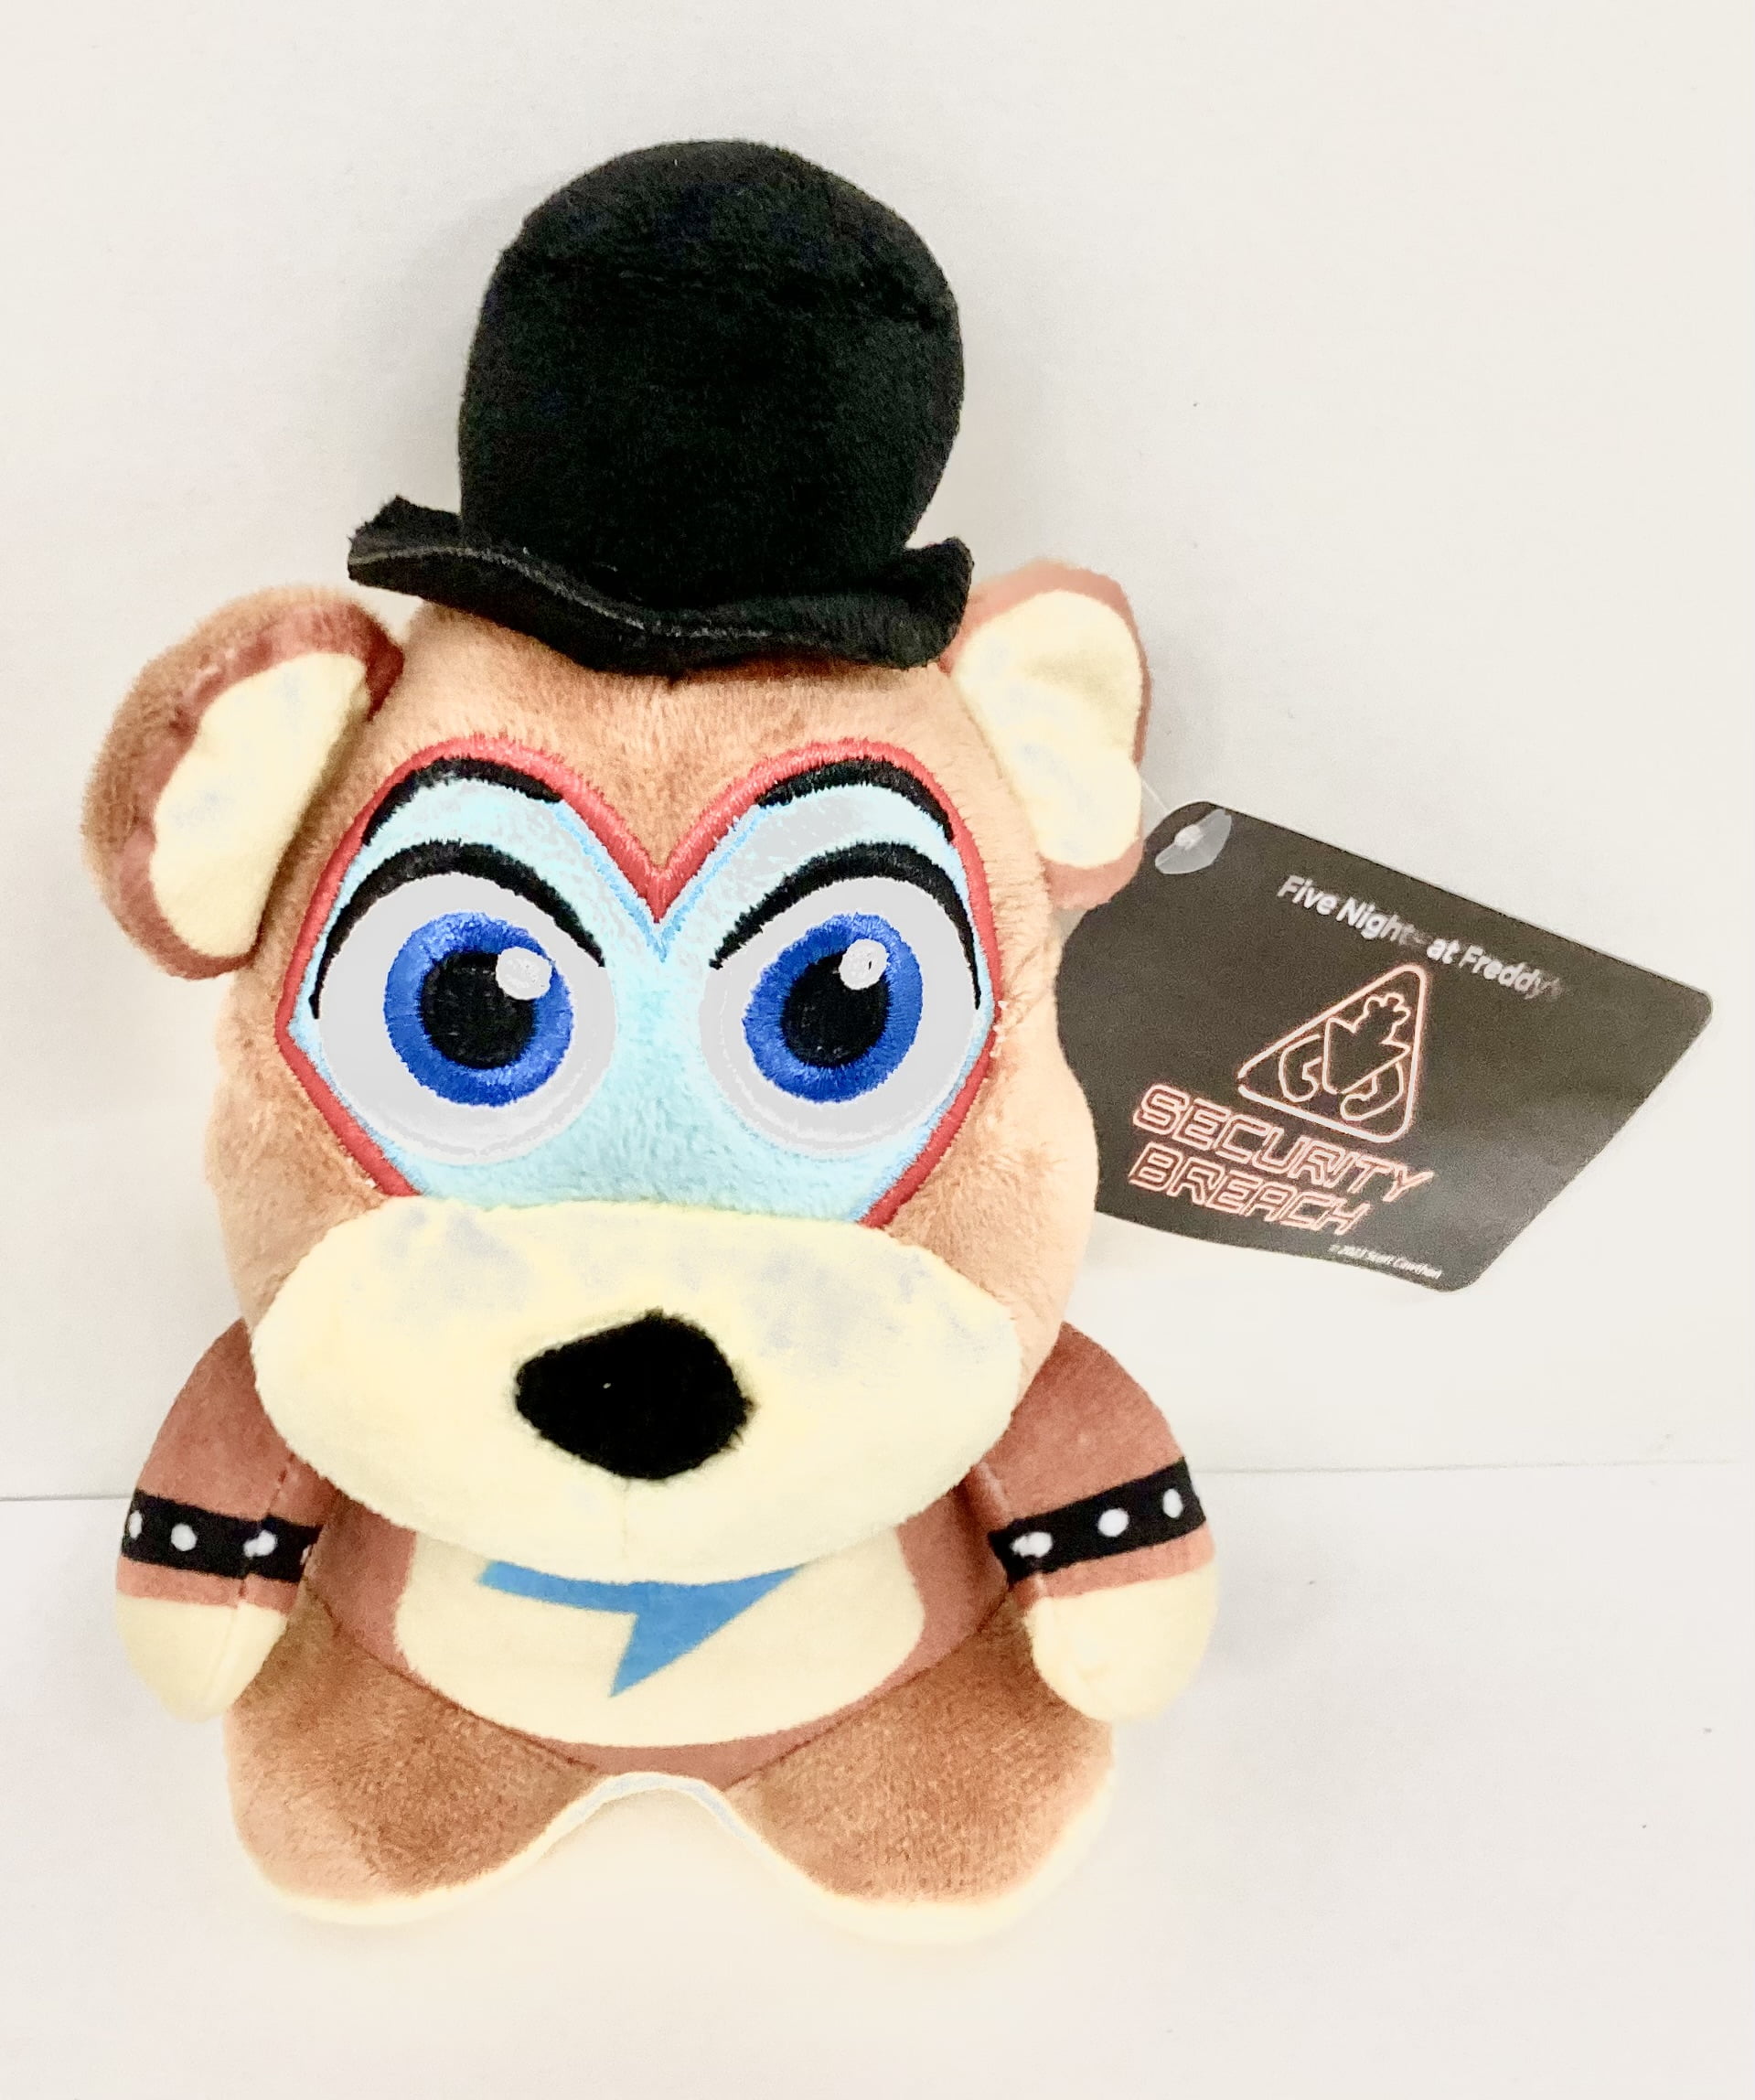 Funko Plush: Five Nights at Freddy's (FNAF) FanversePOP! Goes POP!goes The  Weasel - Collectable Soft Toy - Birthday Gift Idea - Official Merchandise 